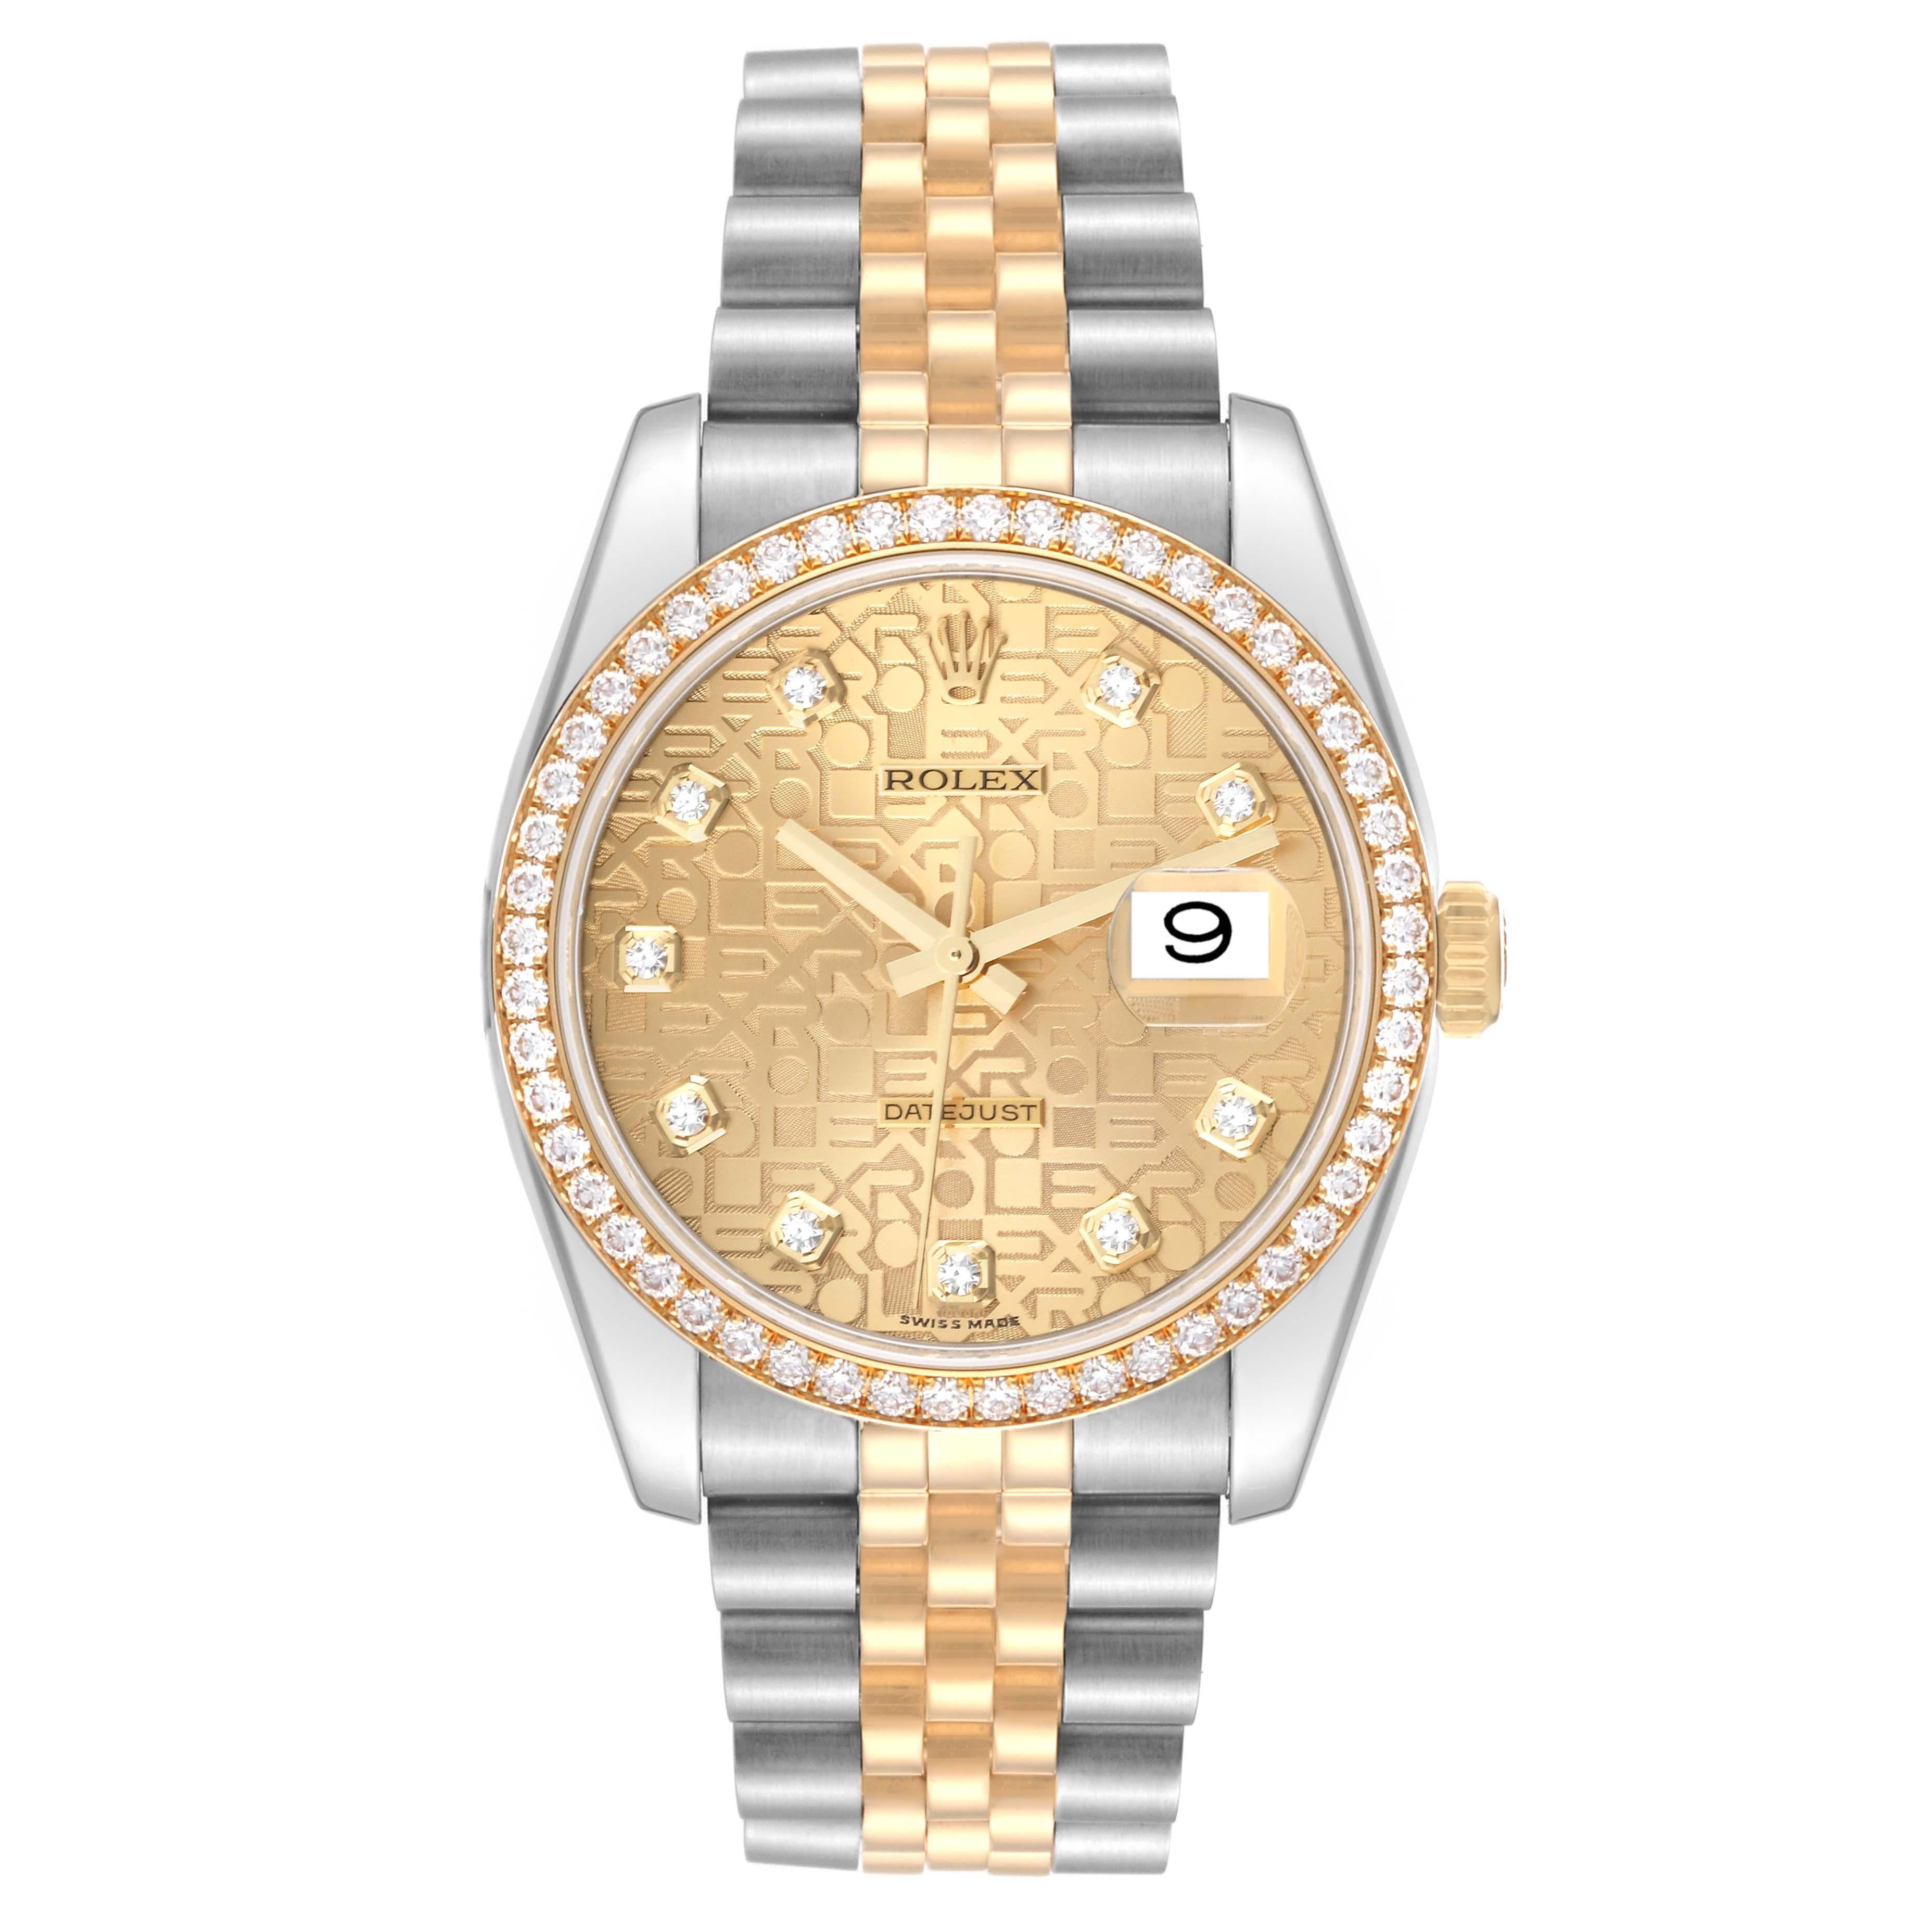 Rolex Datejust Anniversary Dial Steel Yellow Gold Diamond Men's Watch 116243. Officially certified chronometer automatic self-winding movement. Stainless steel case 36.0 mm in diameter.  Rolex logo on an 18k yellow gold crown. 18k yellow gold